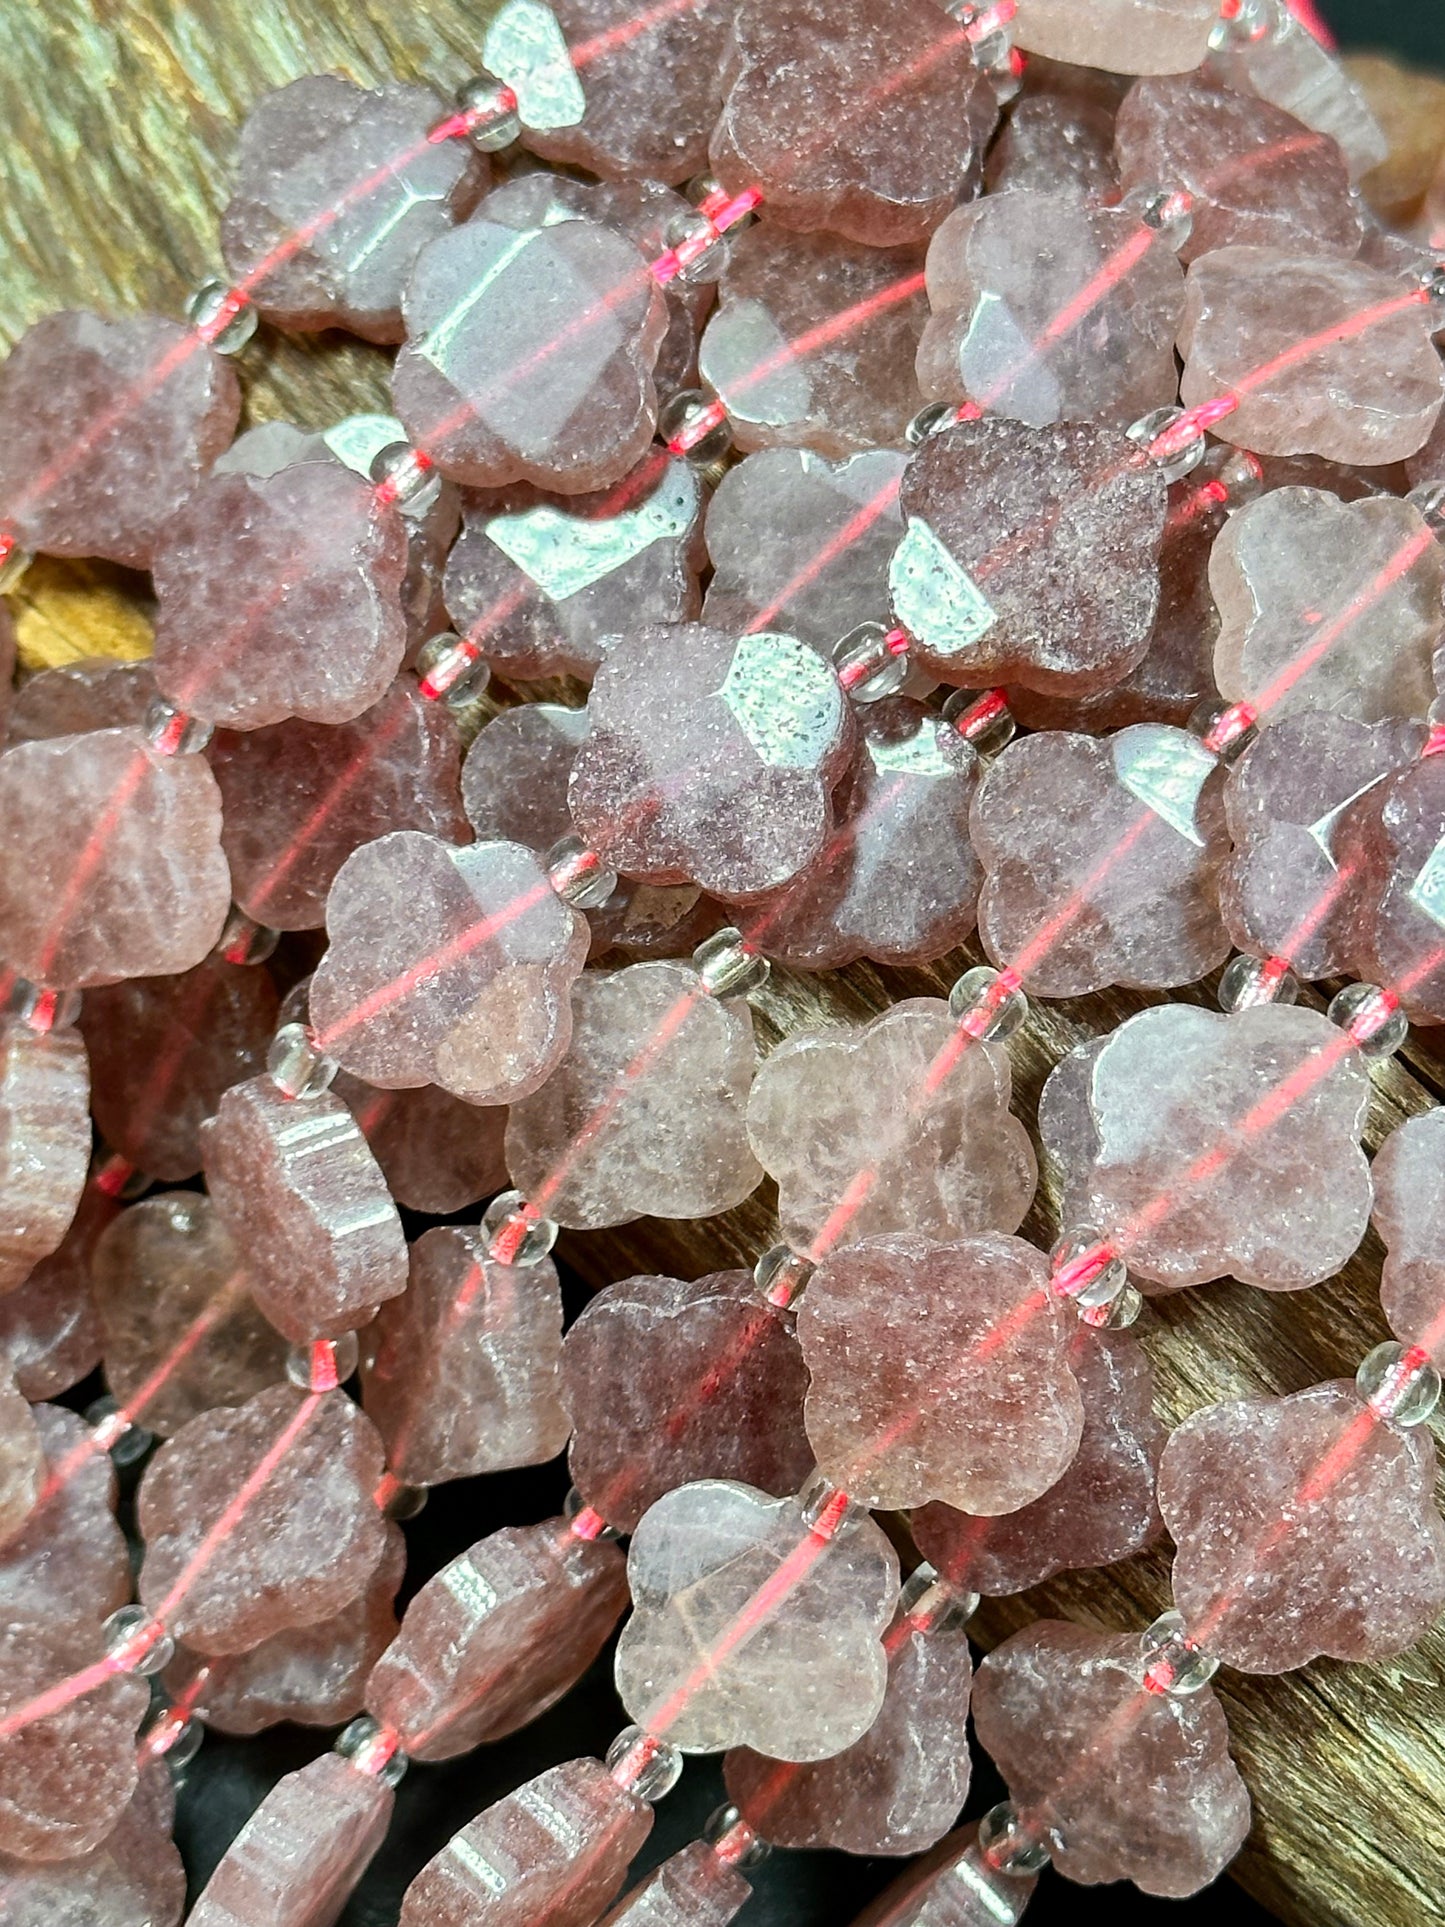 NATURAL Strawberry Quartz Gemstone Bead Faceted 16mm Clover Flower Shape Bead, Beautiful Red Pink Color Gemstone Beads Full Strand 15.5"